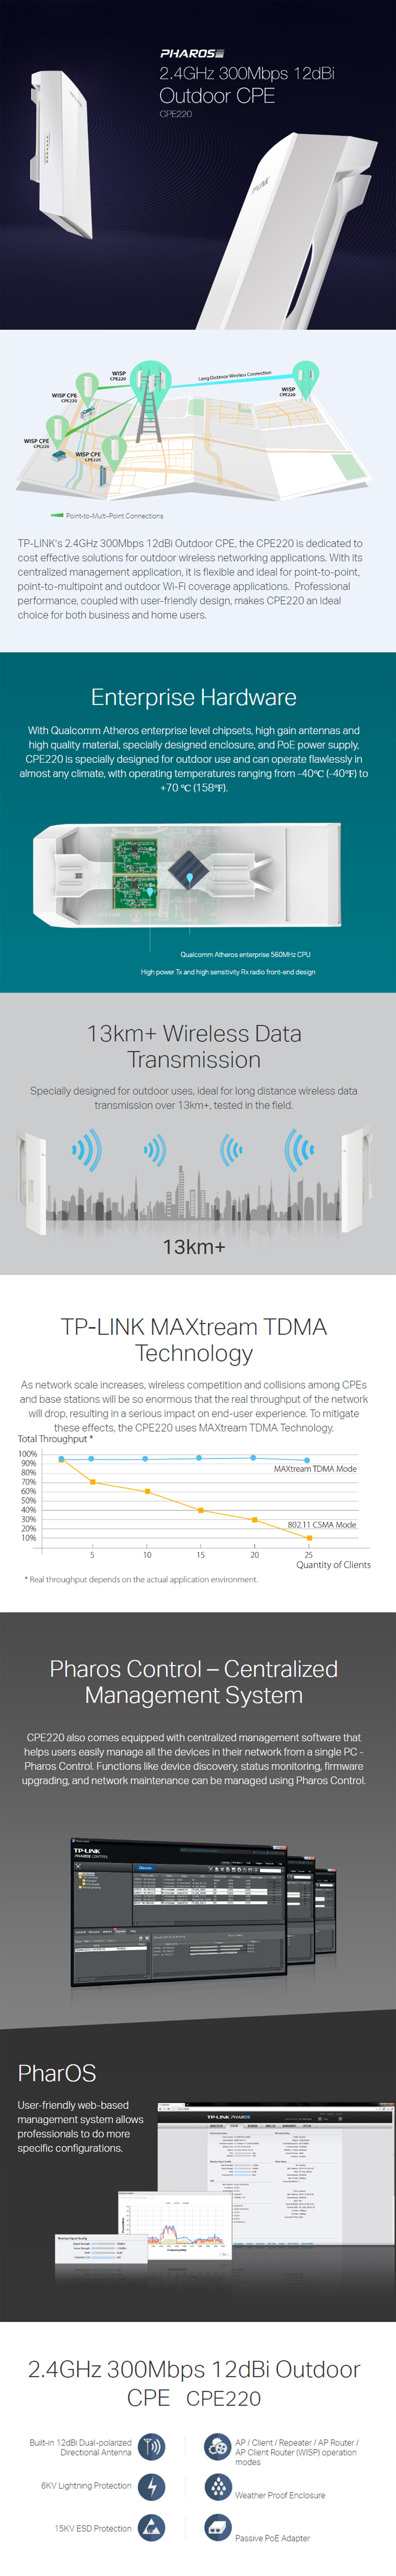 Antennas-TP-Link-CPE220-2-4GHz-300Mbps-12dBi-Outdoor-CPE-2